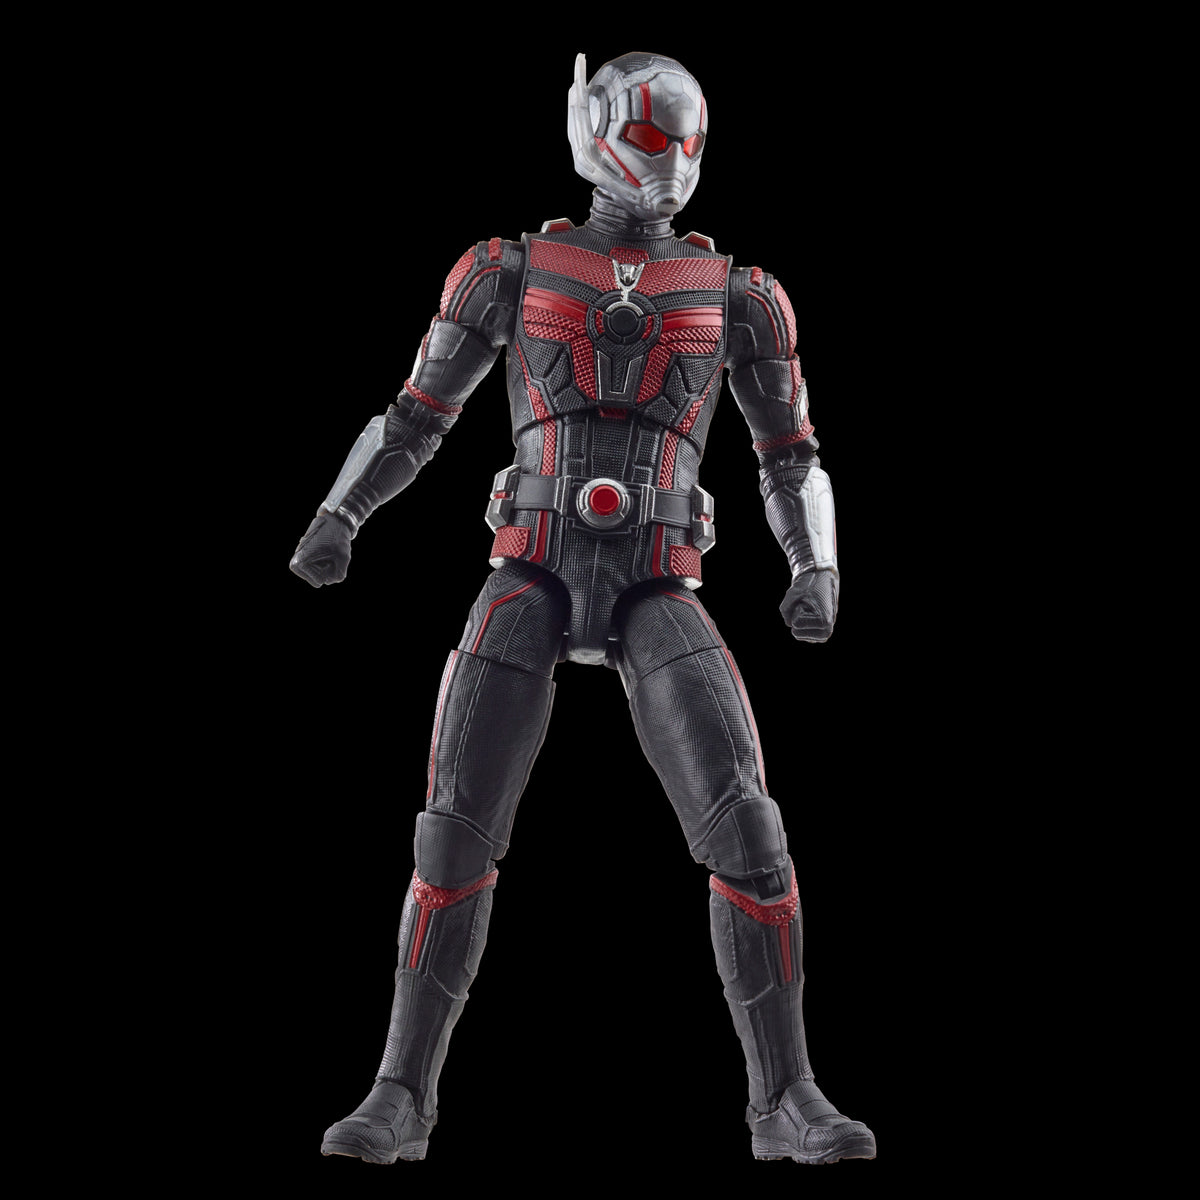  Marvel Legends Series Ant-Man,Ant-Man & The Wasp